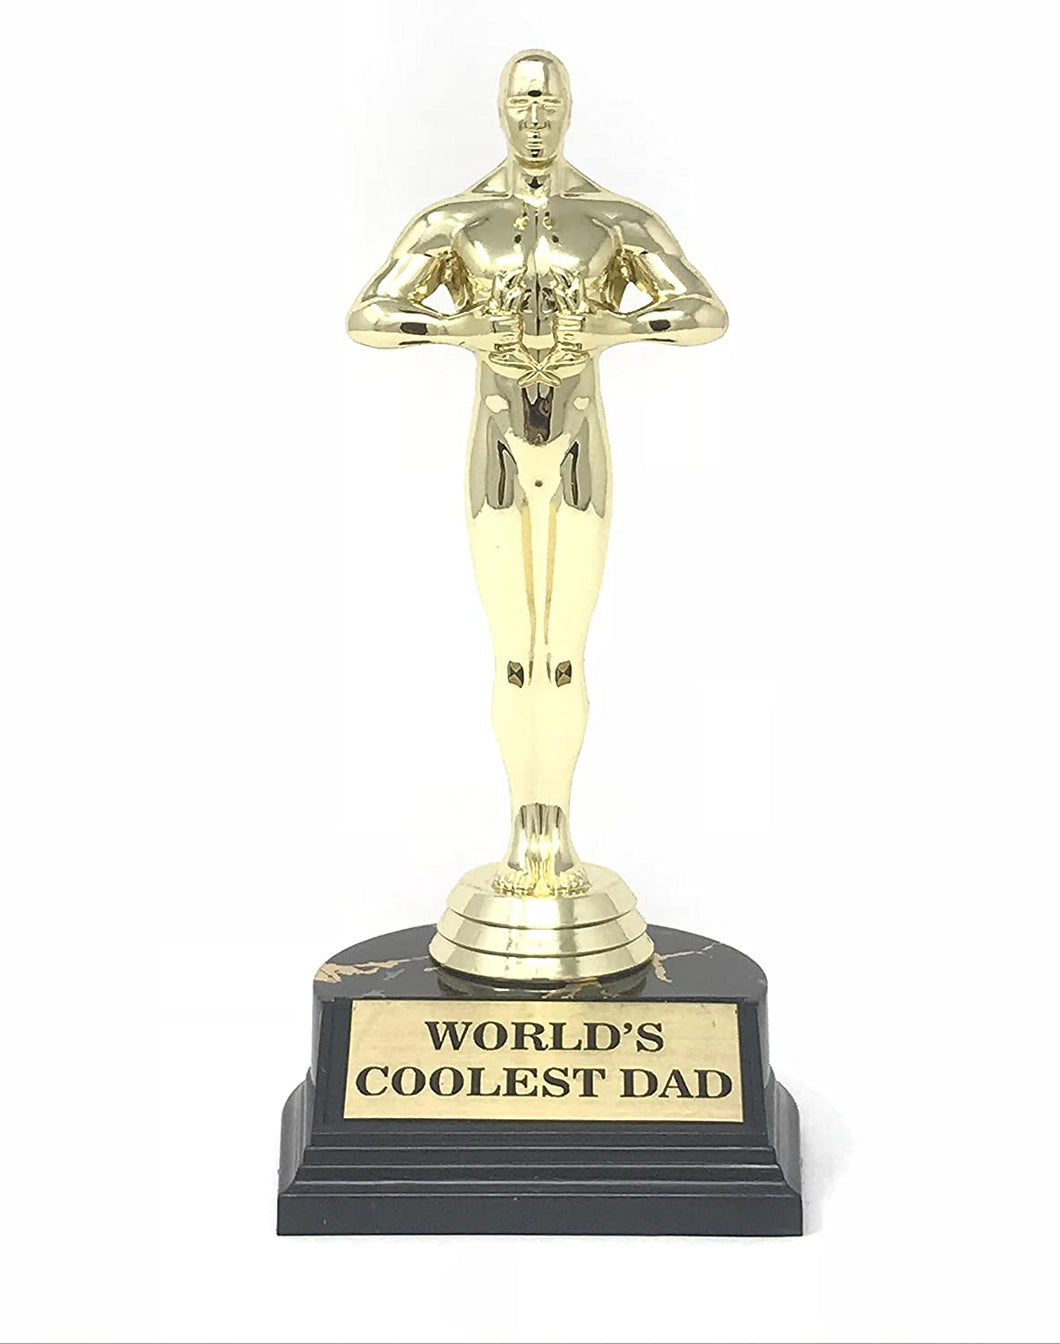 World's Coolest Dad (7 inches)